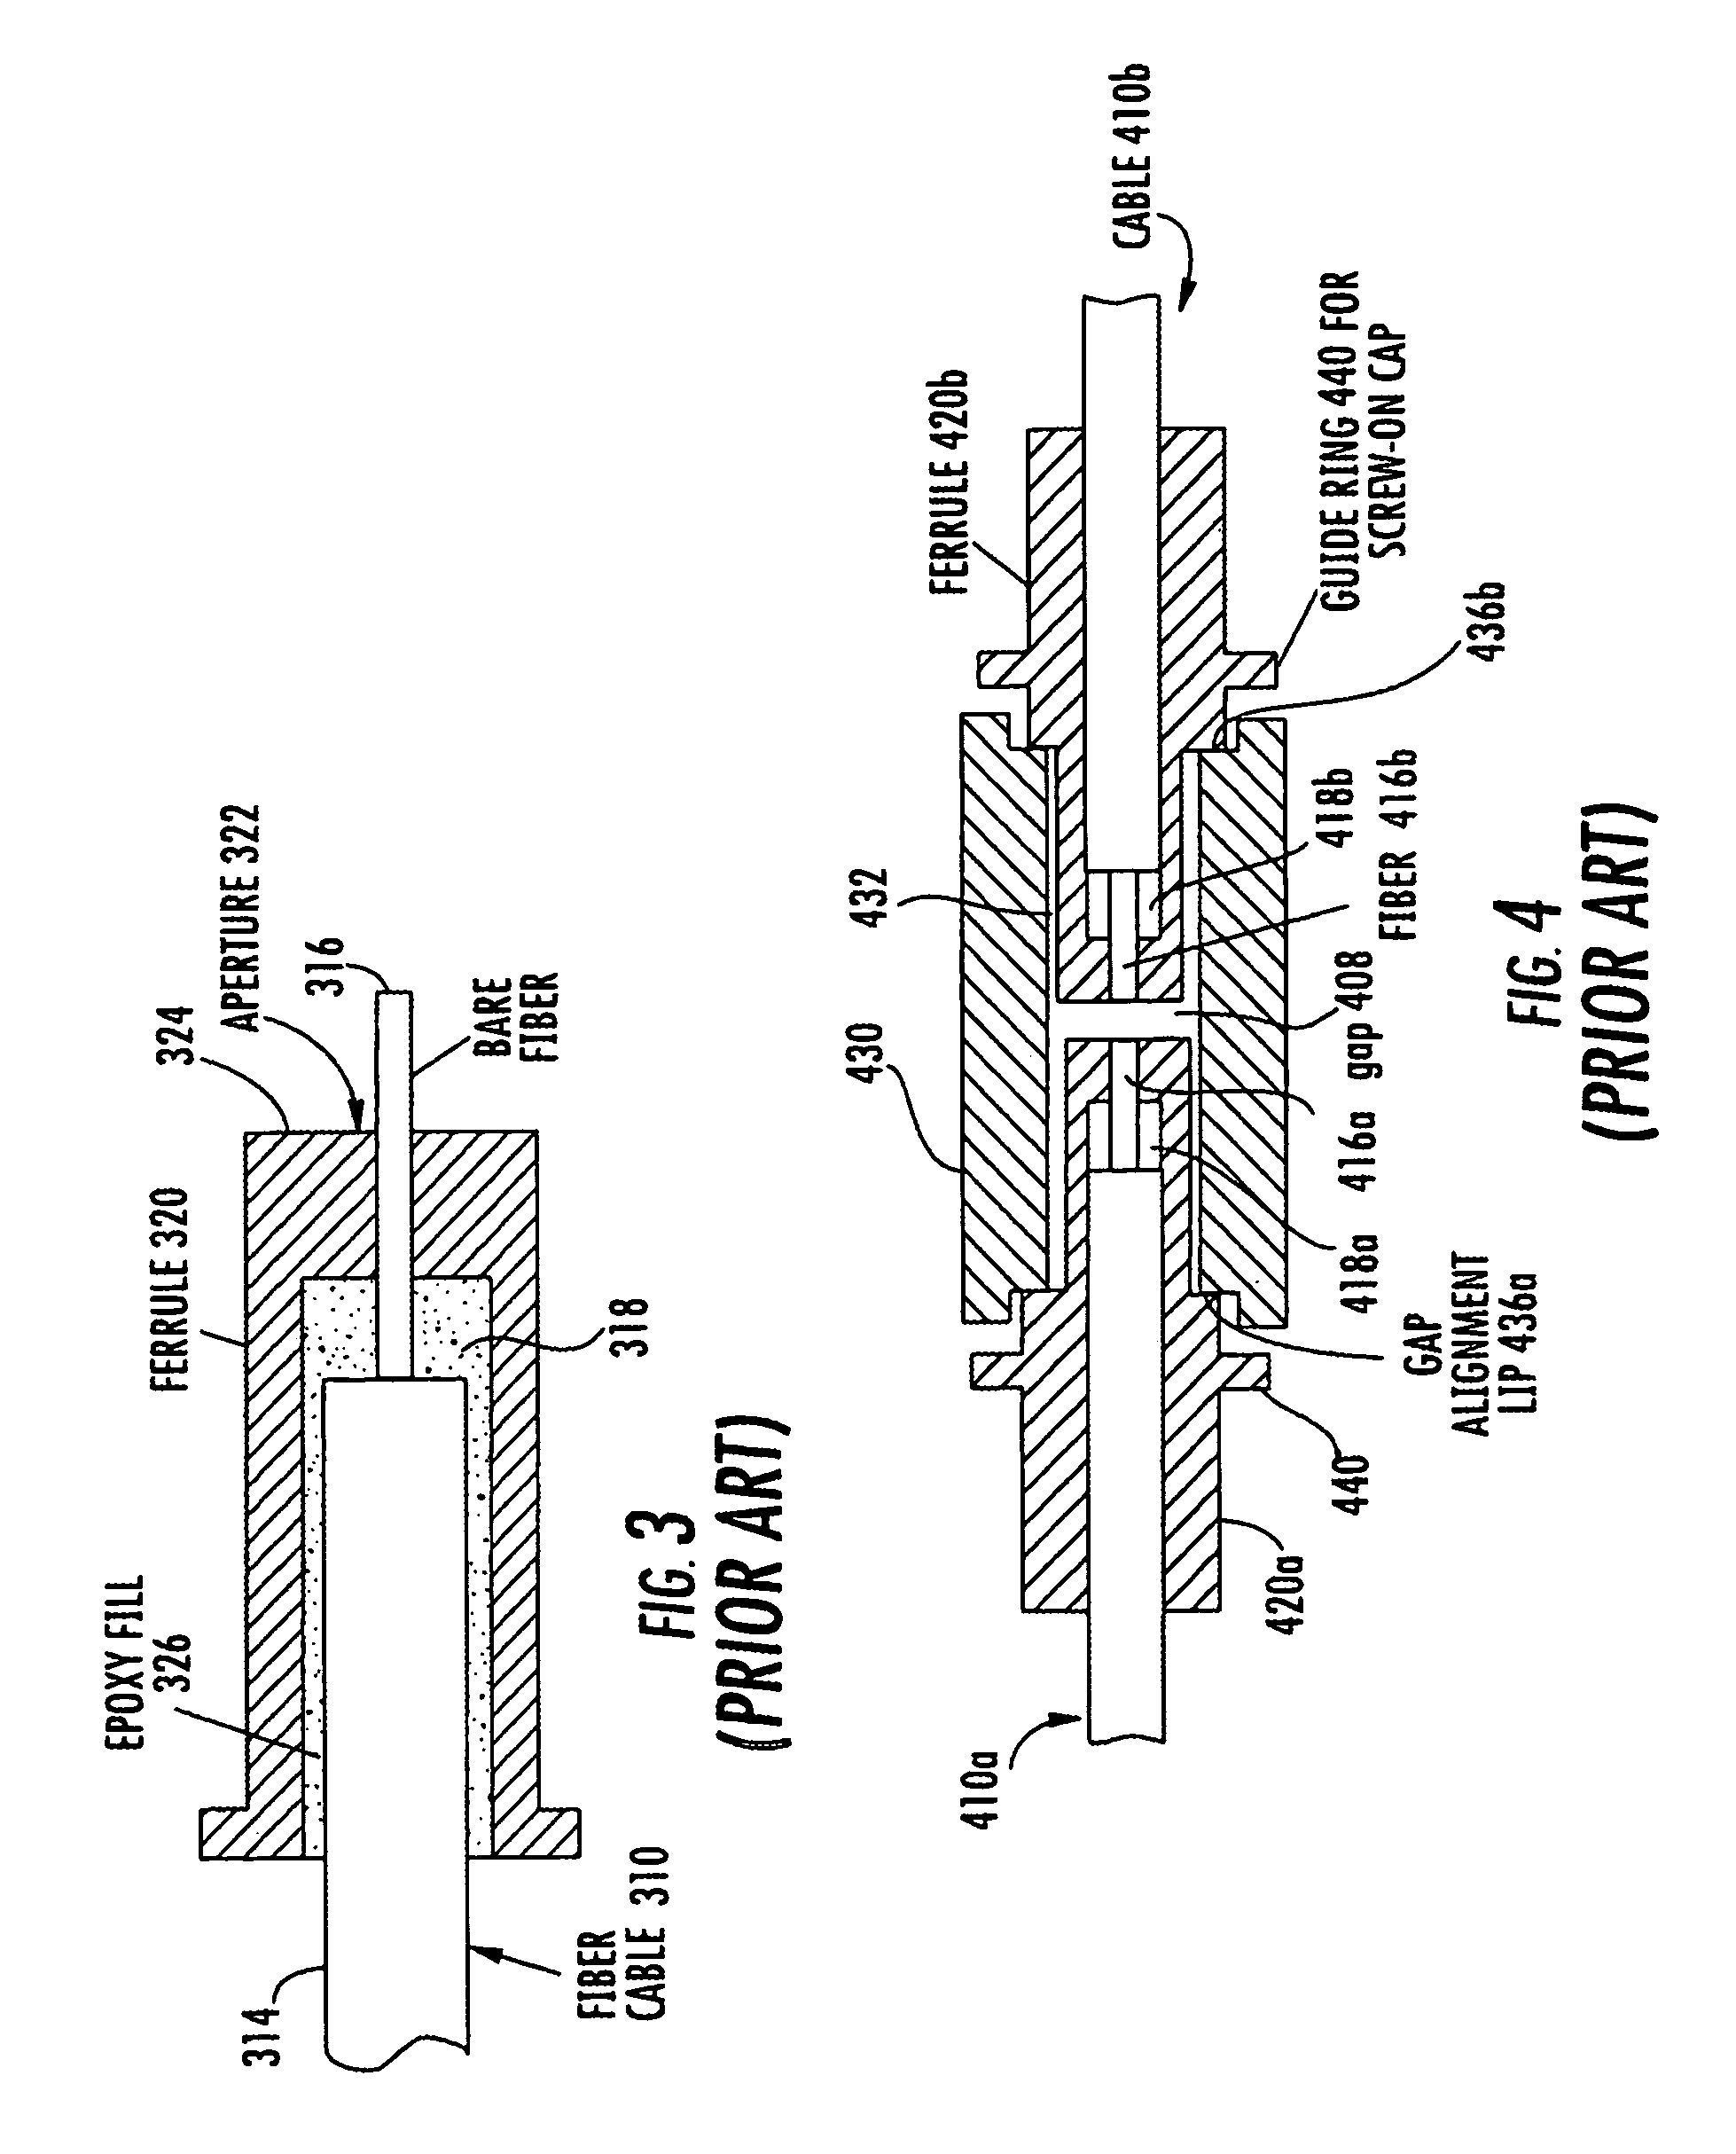 Optical fiber coupling and inline fault monitor device and method